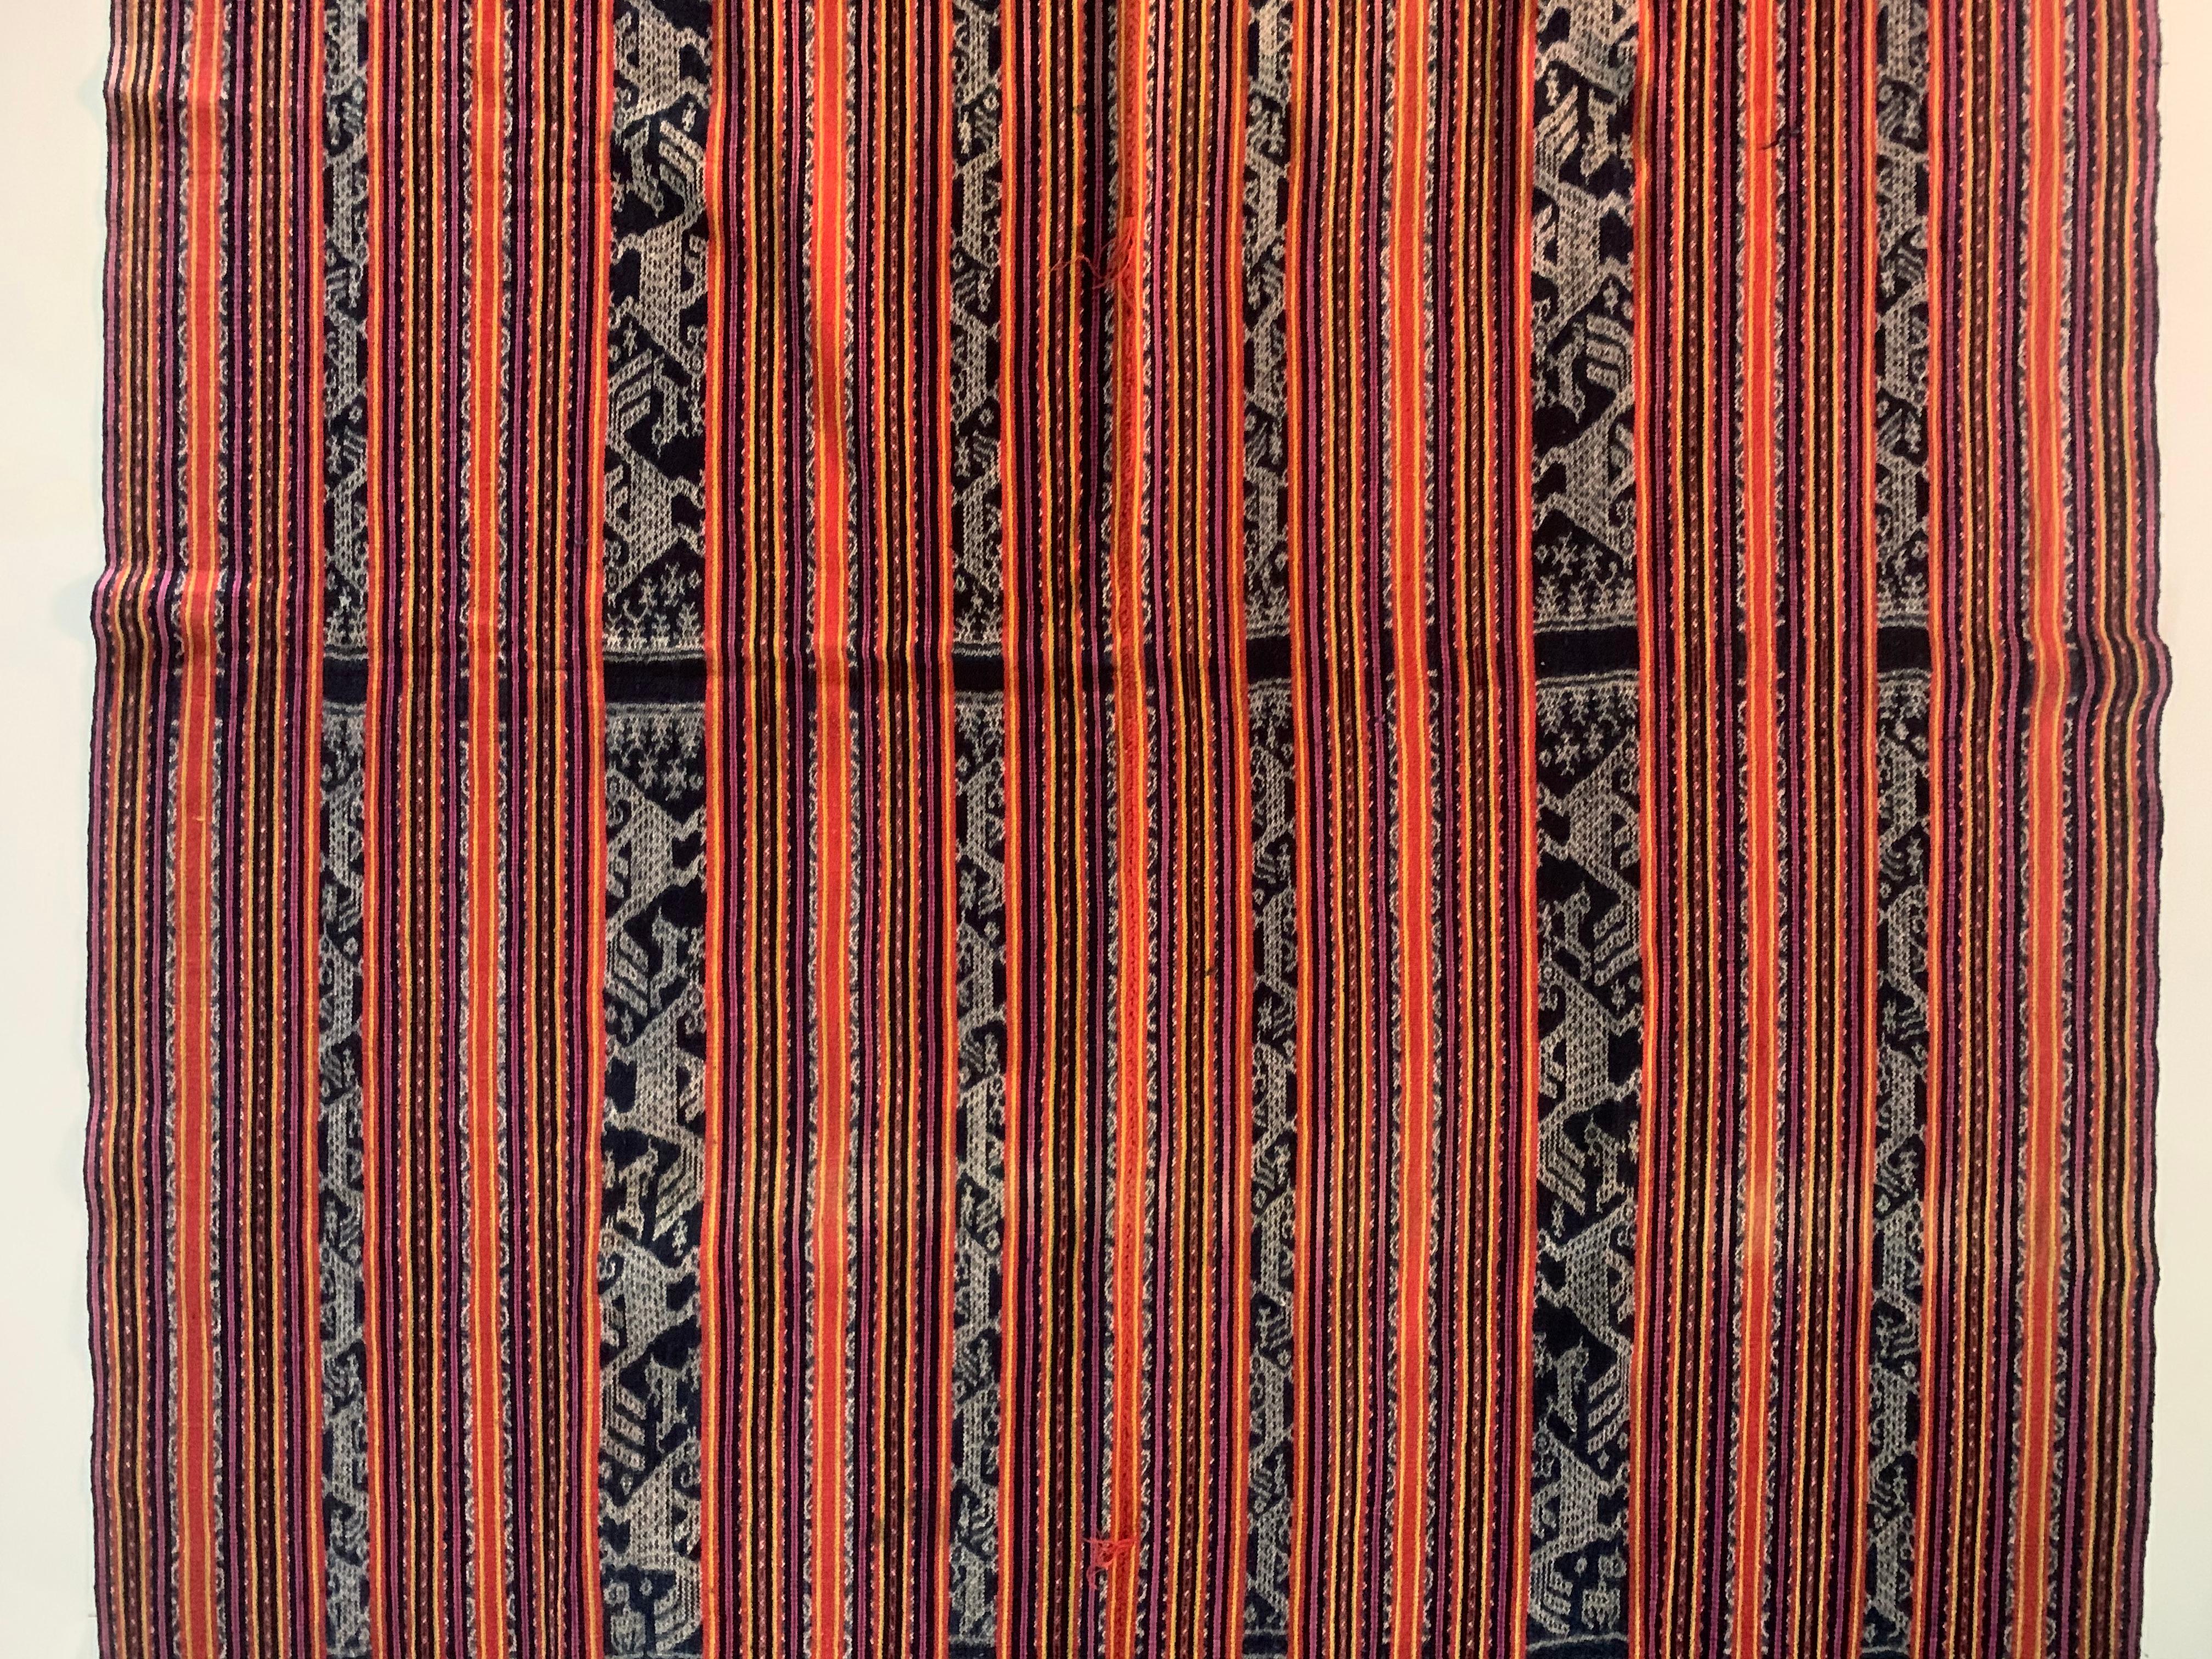 This Ikat textile originates from the Island of Timor, Indonesia. It is hand-woven using naturally dyed yarns via a method passed on through generations. It features a stunning array of distinct tribal patterns and bright colours as well as chicken